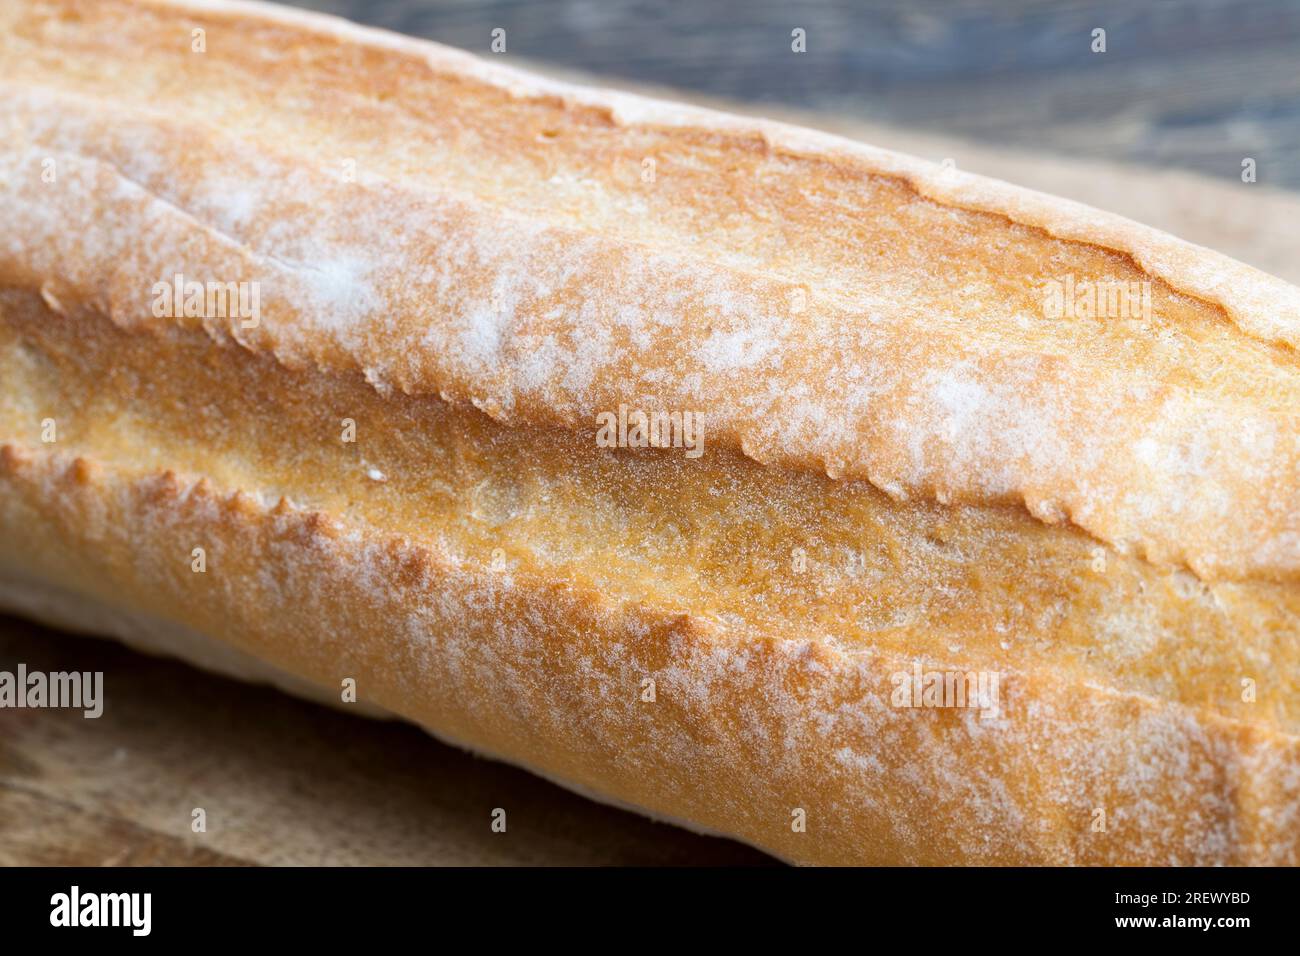 light wheat flour baguette, baked goods for cooking with bread